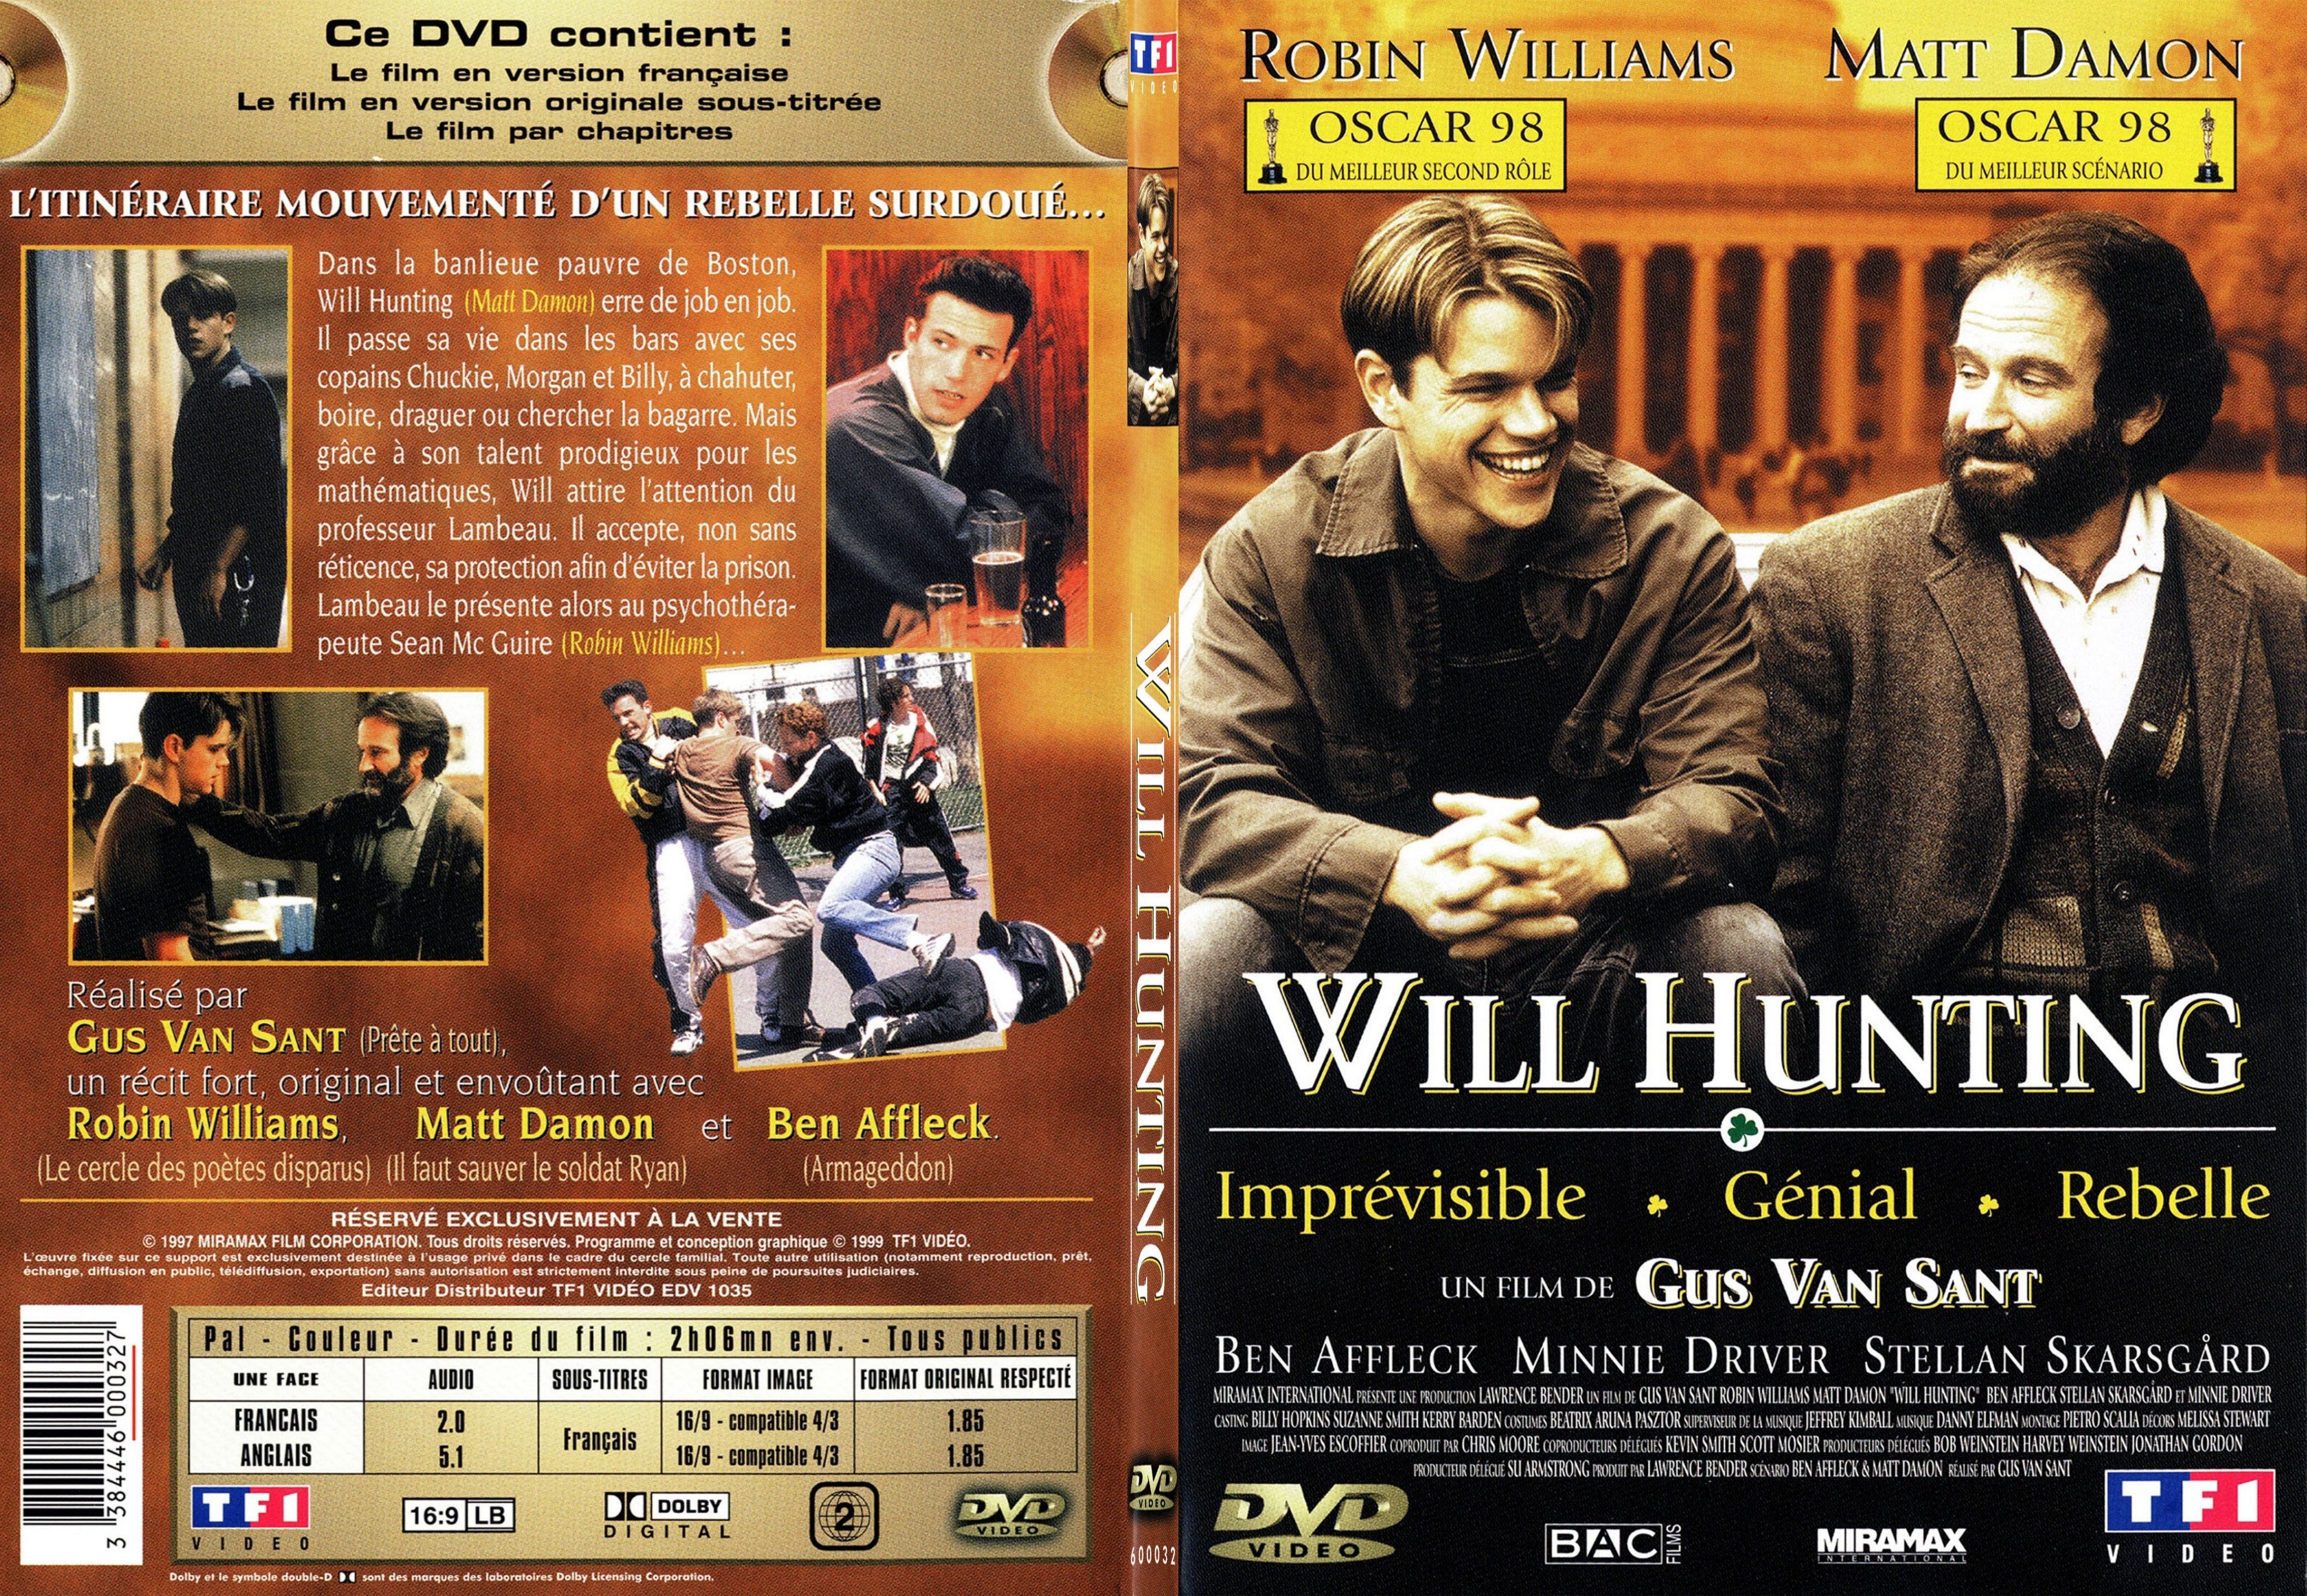 Jaquette DVD Will Hunting - SLIM